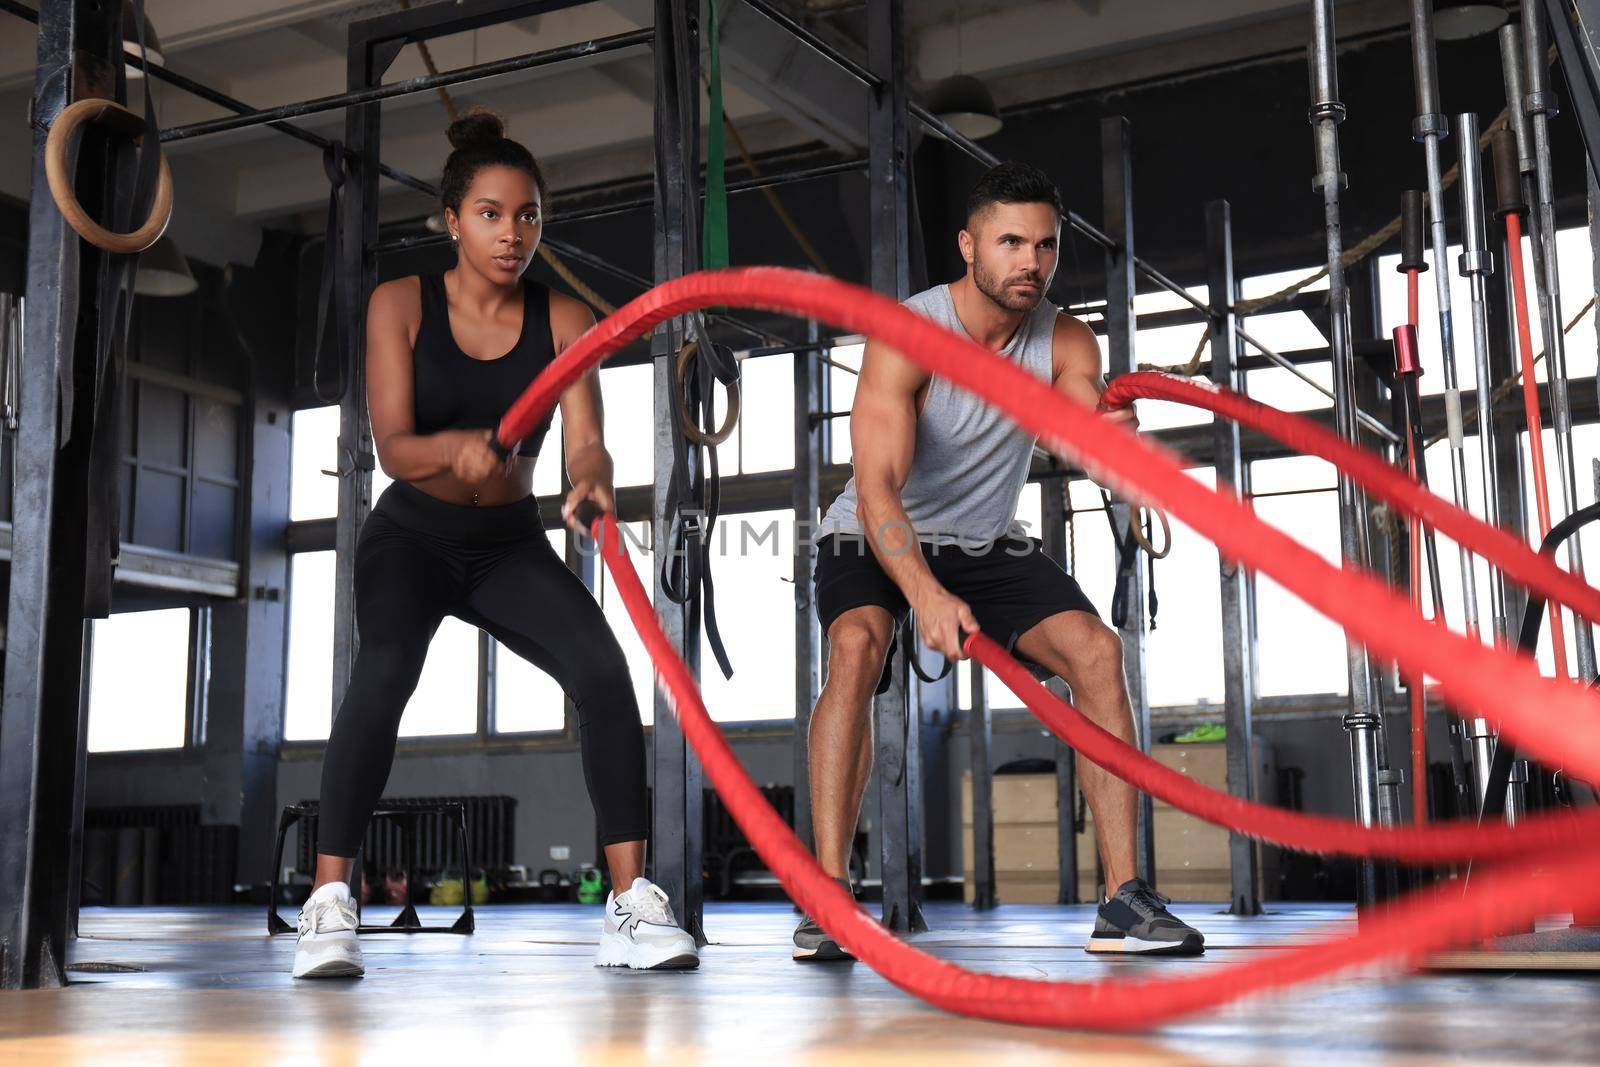 Athletic young couple with battle rope doing exercise in functional training fitness gym